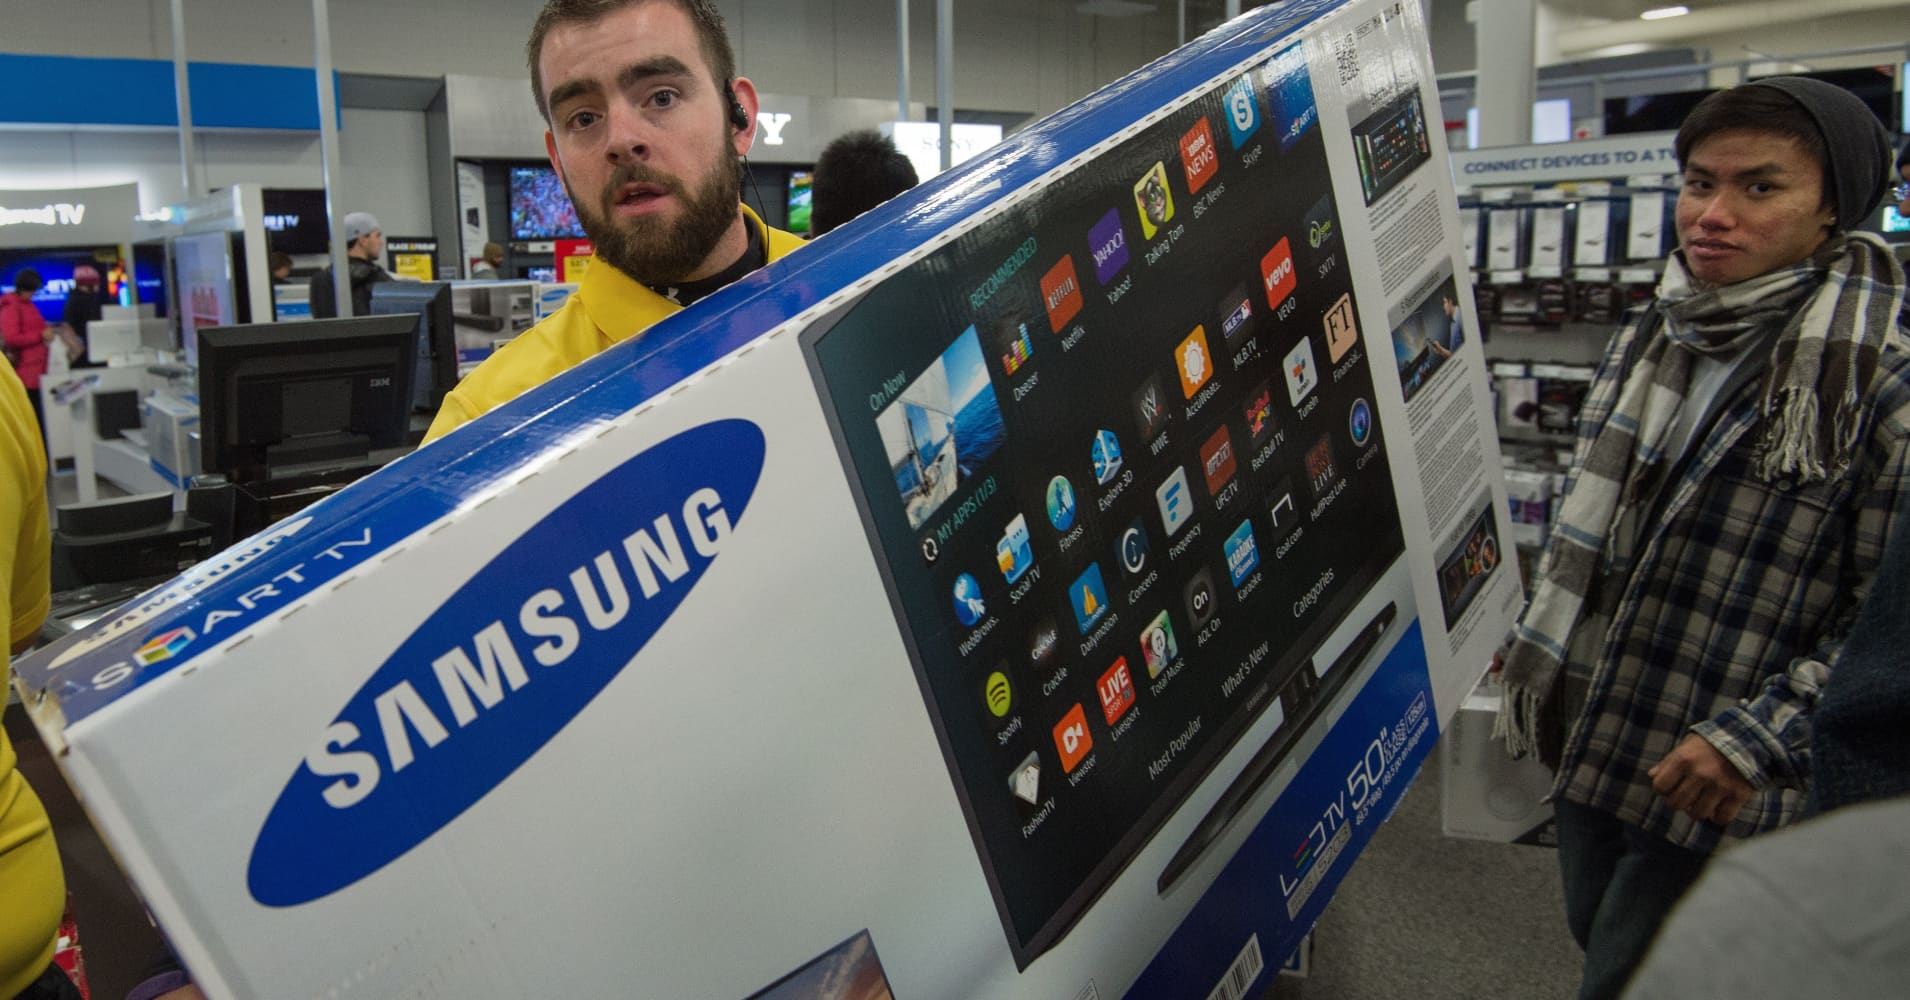 Jefferies downgrades Best Buy on plunging TV prices